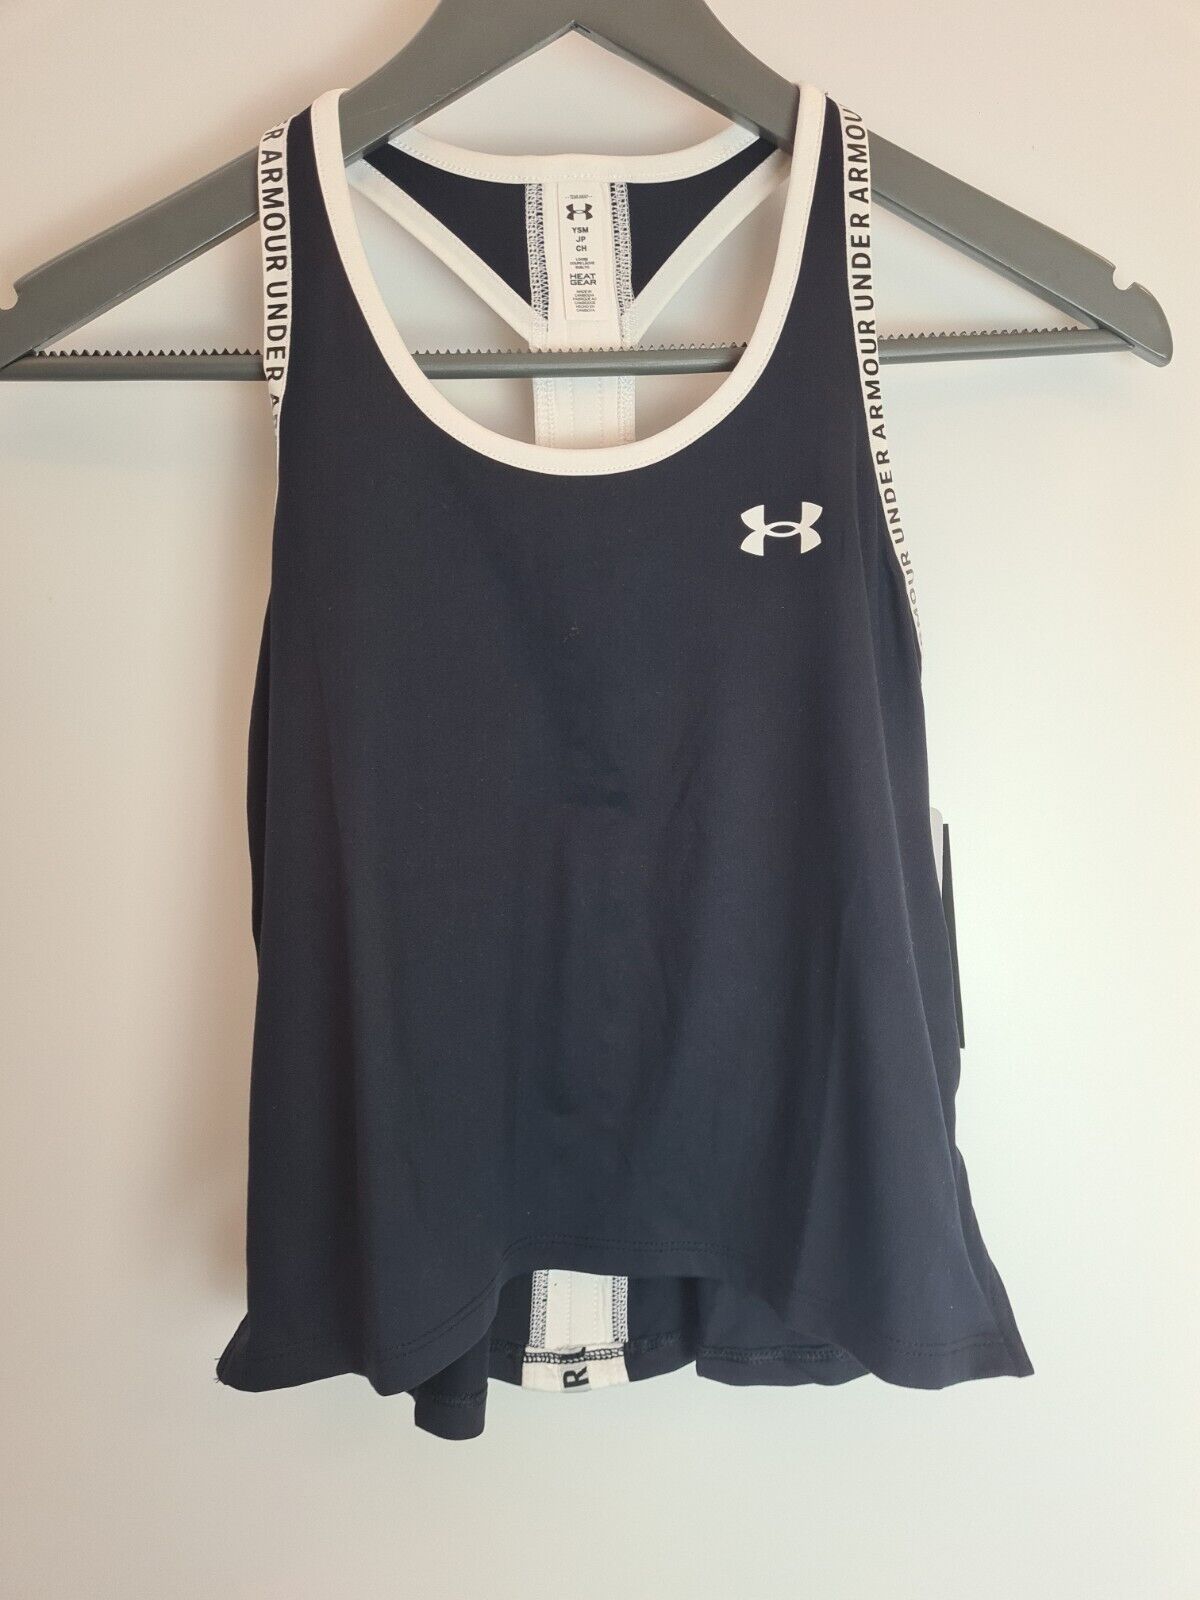 Under Armour Girls' Fitness Knockout Tank Top Junior Size S/M 7-8 Years **** VA1